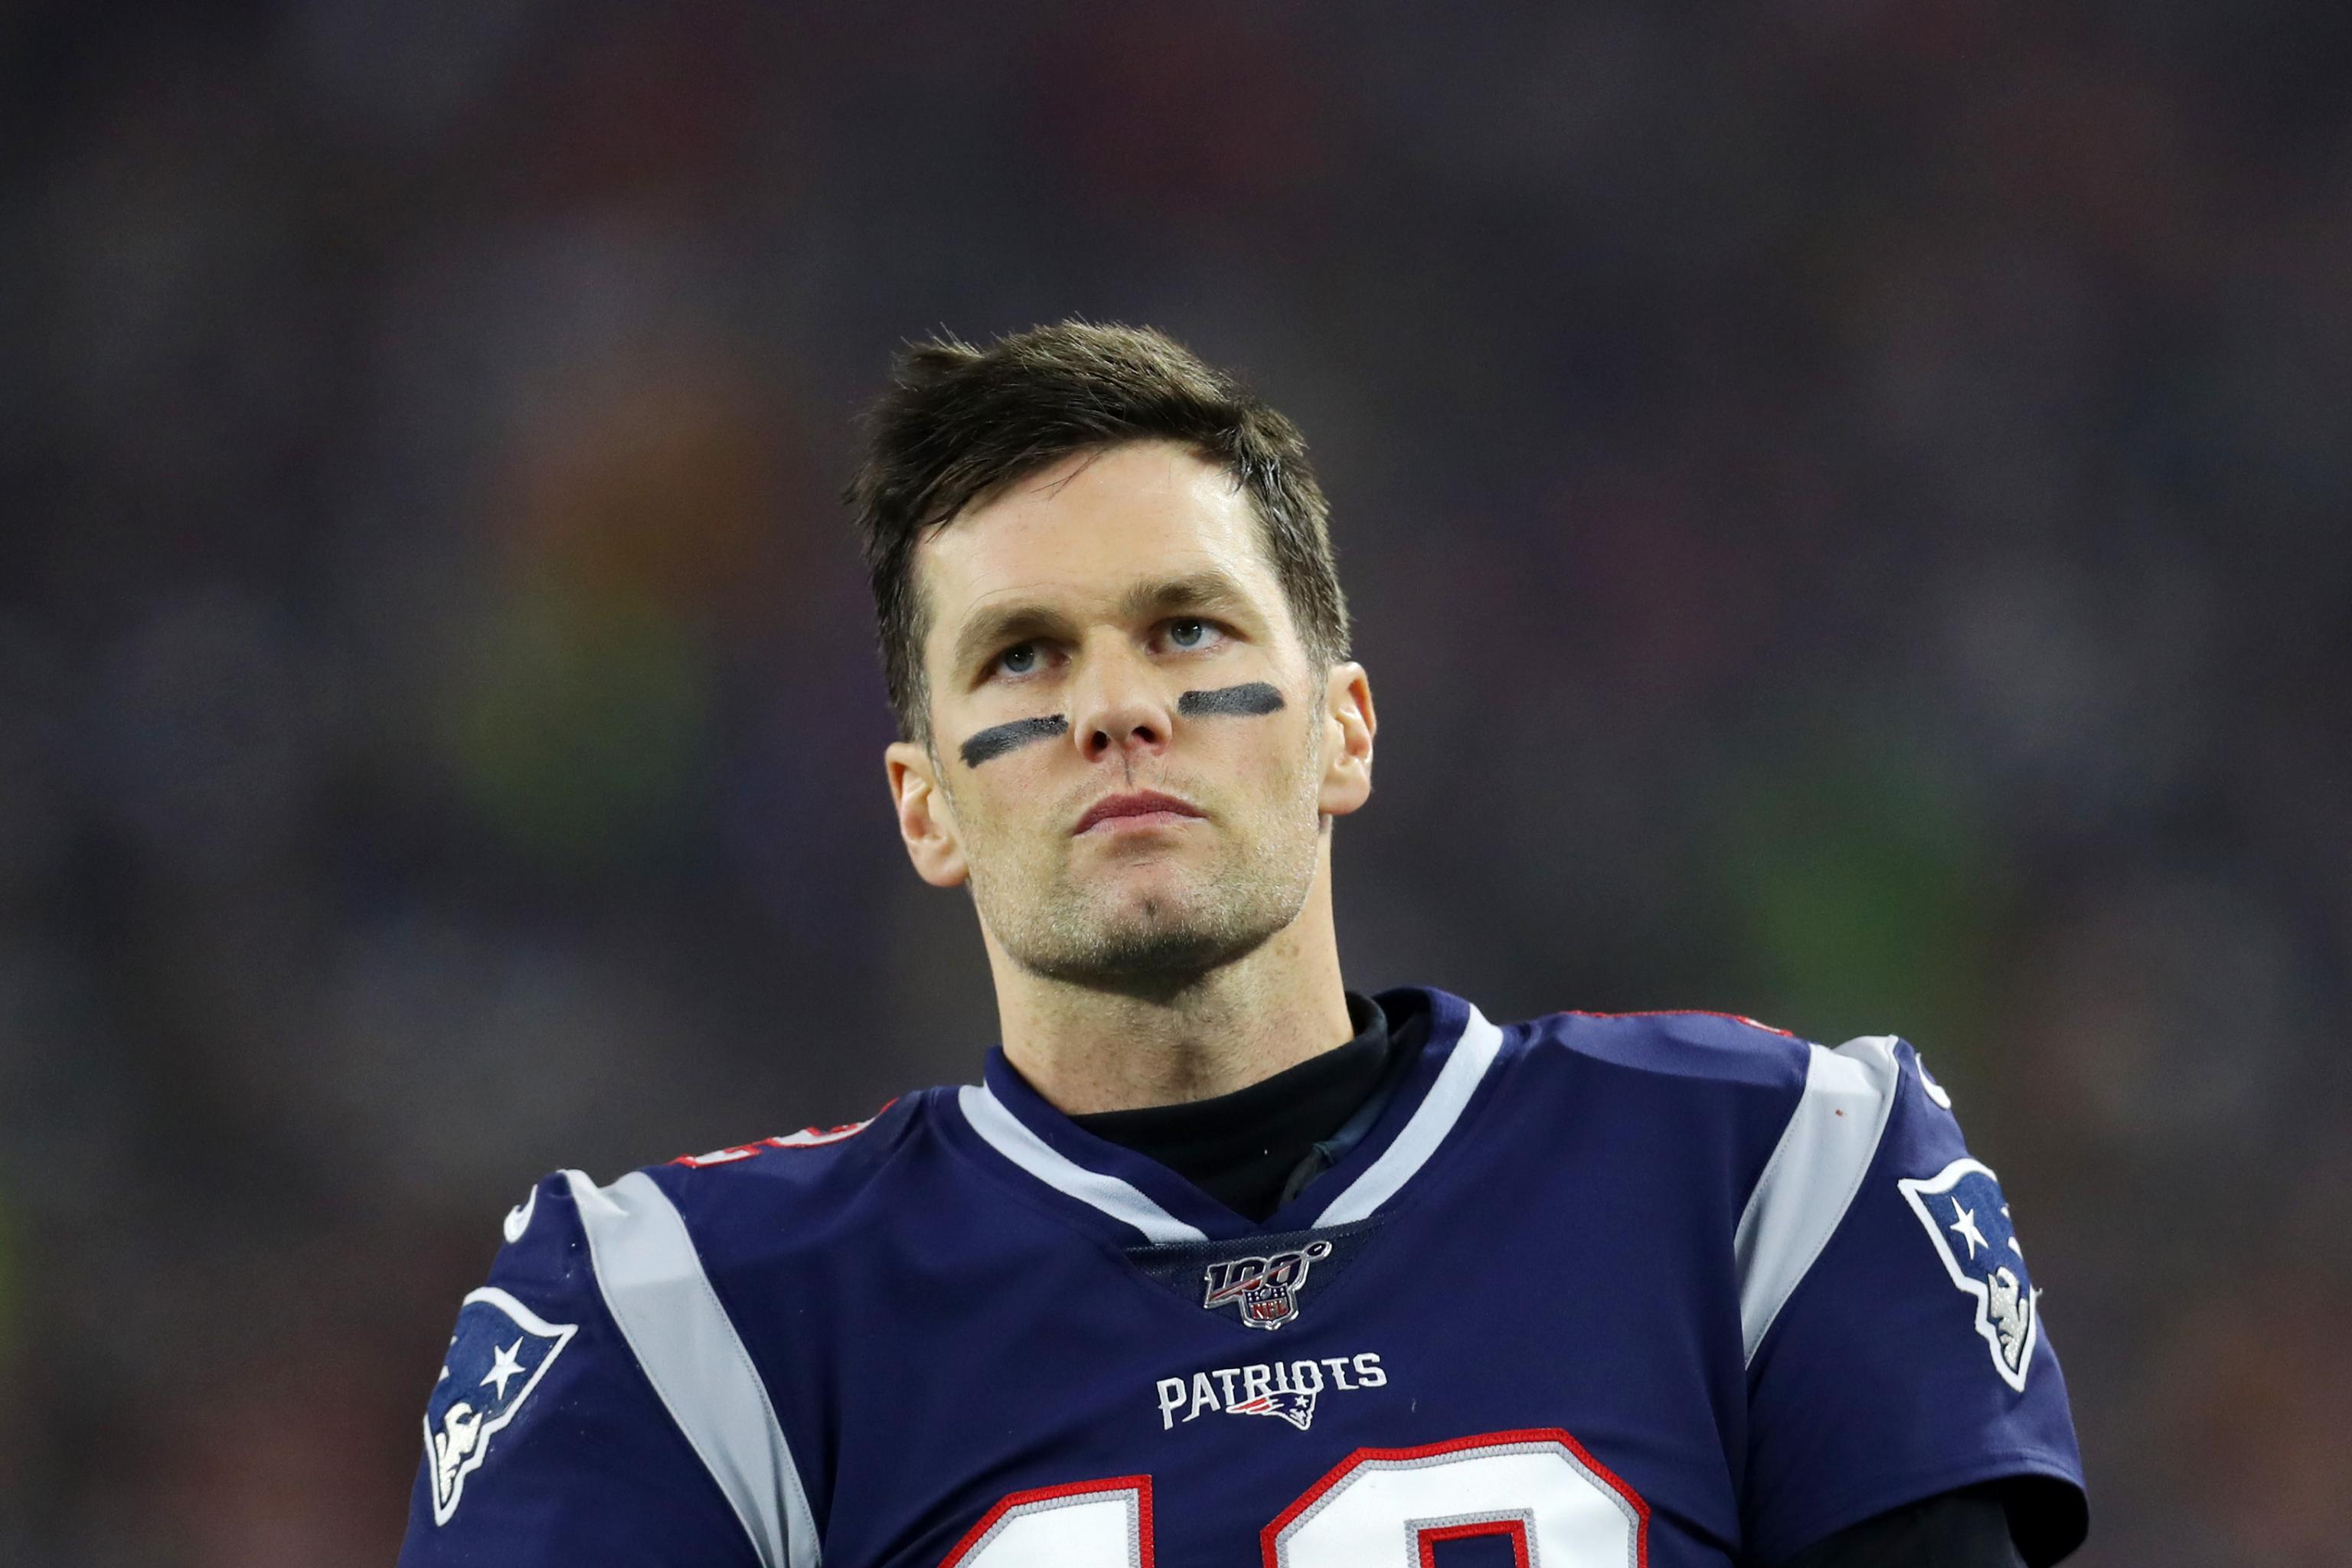 NFL rumors: Patriots' Tom Brady makes bold (and generous) offer to